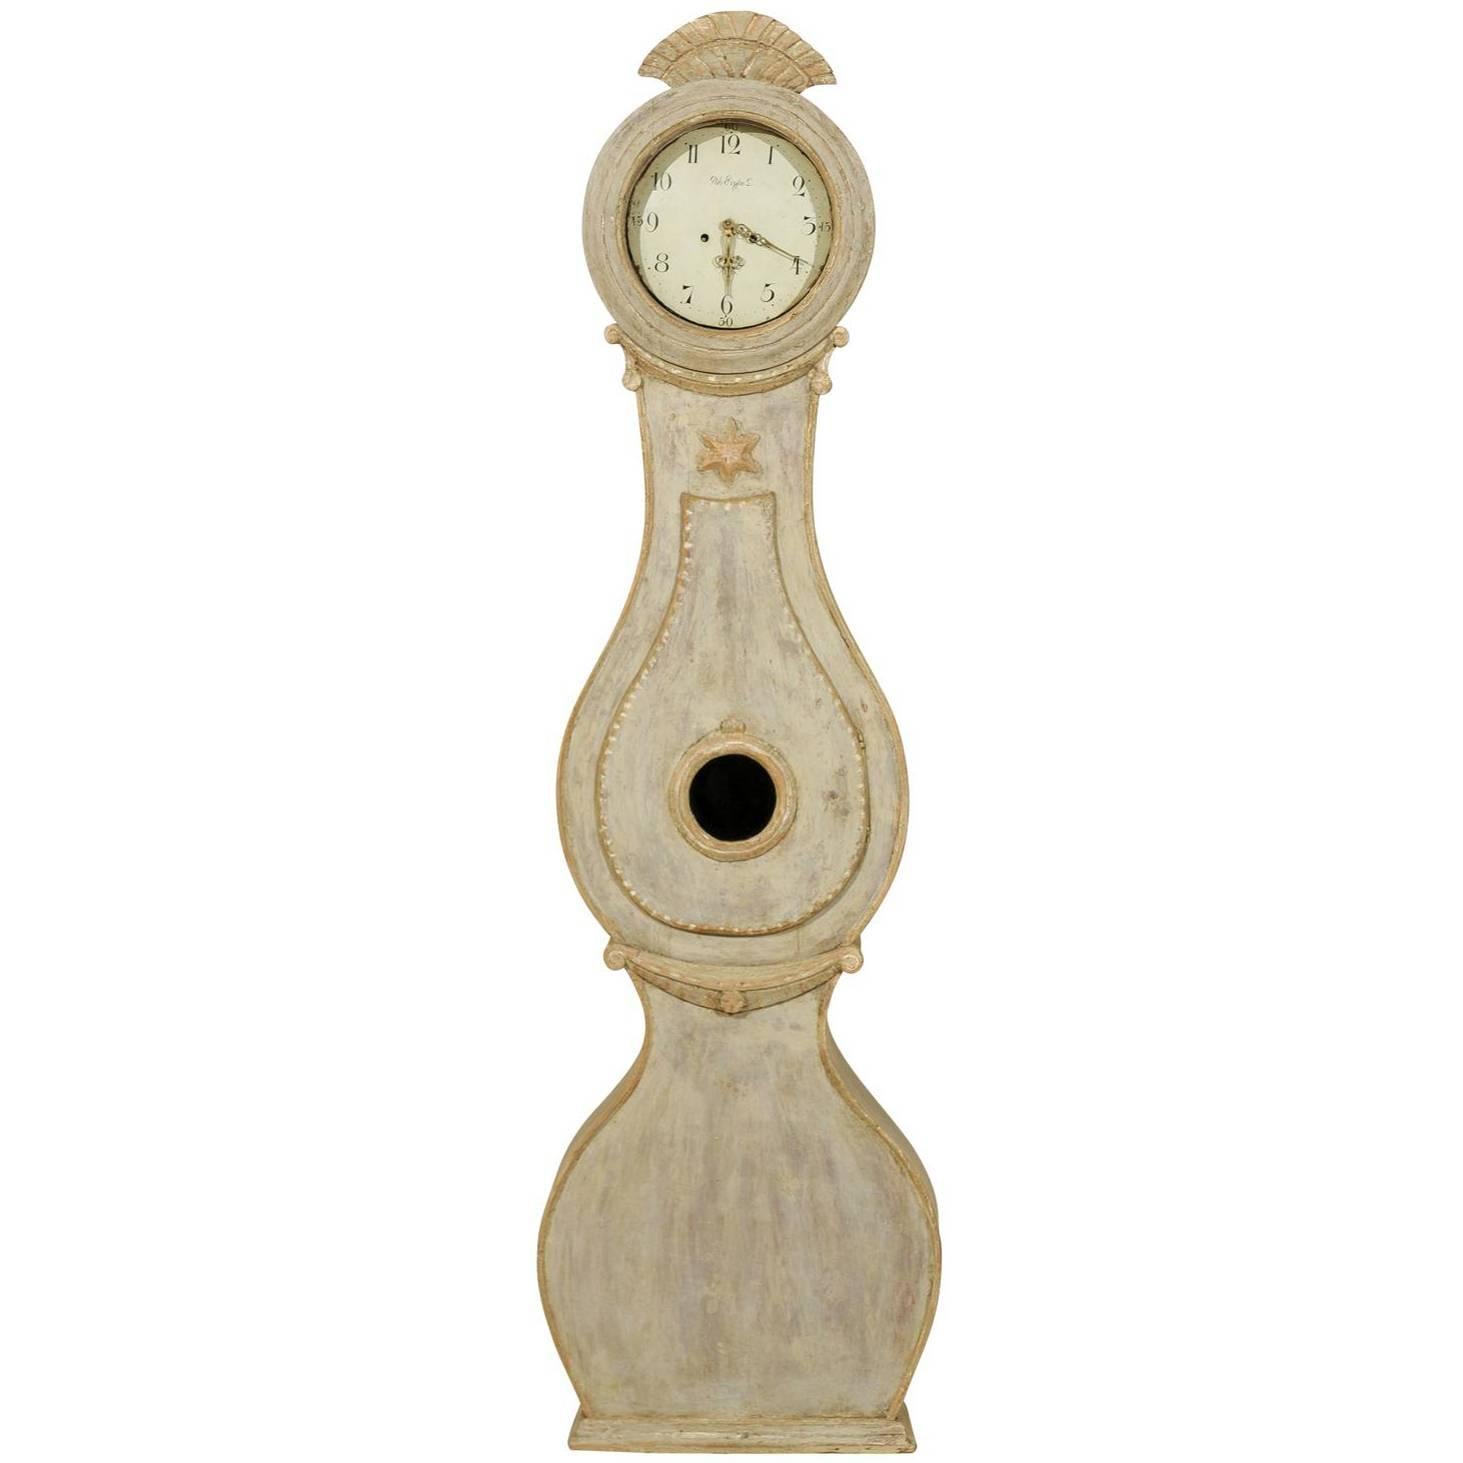 A 19th Century Swedish Fryksdahl Floor Clock with Carved Crest and Star Motif